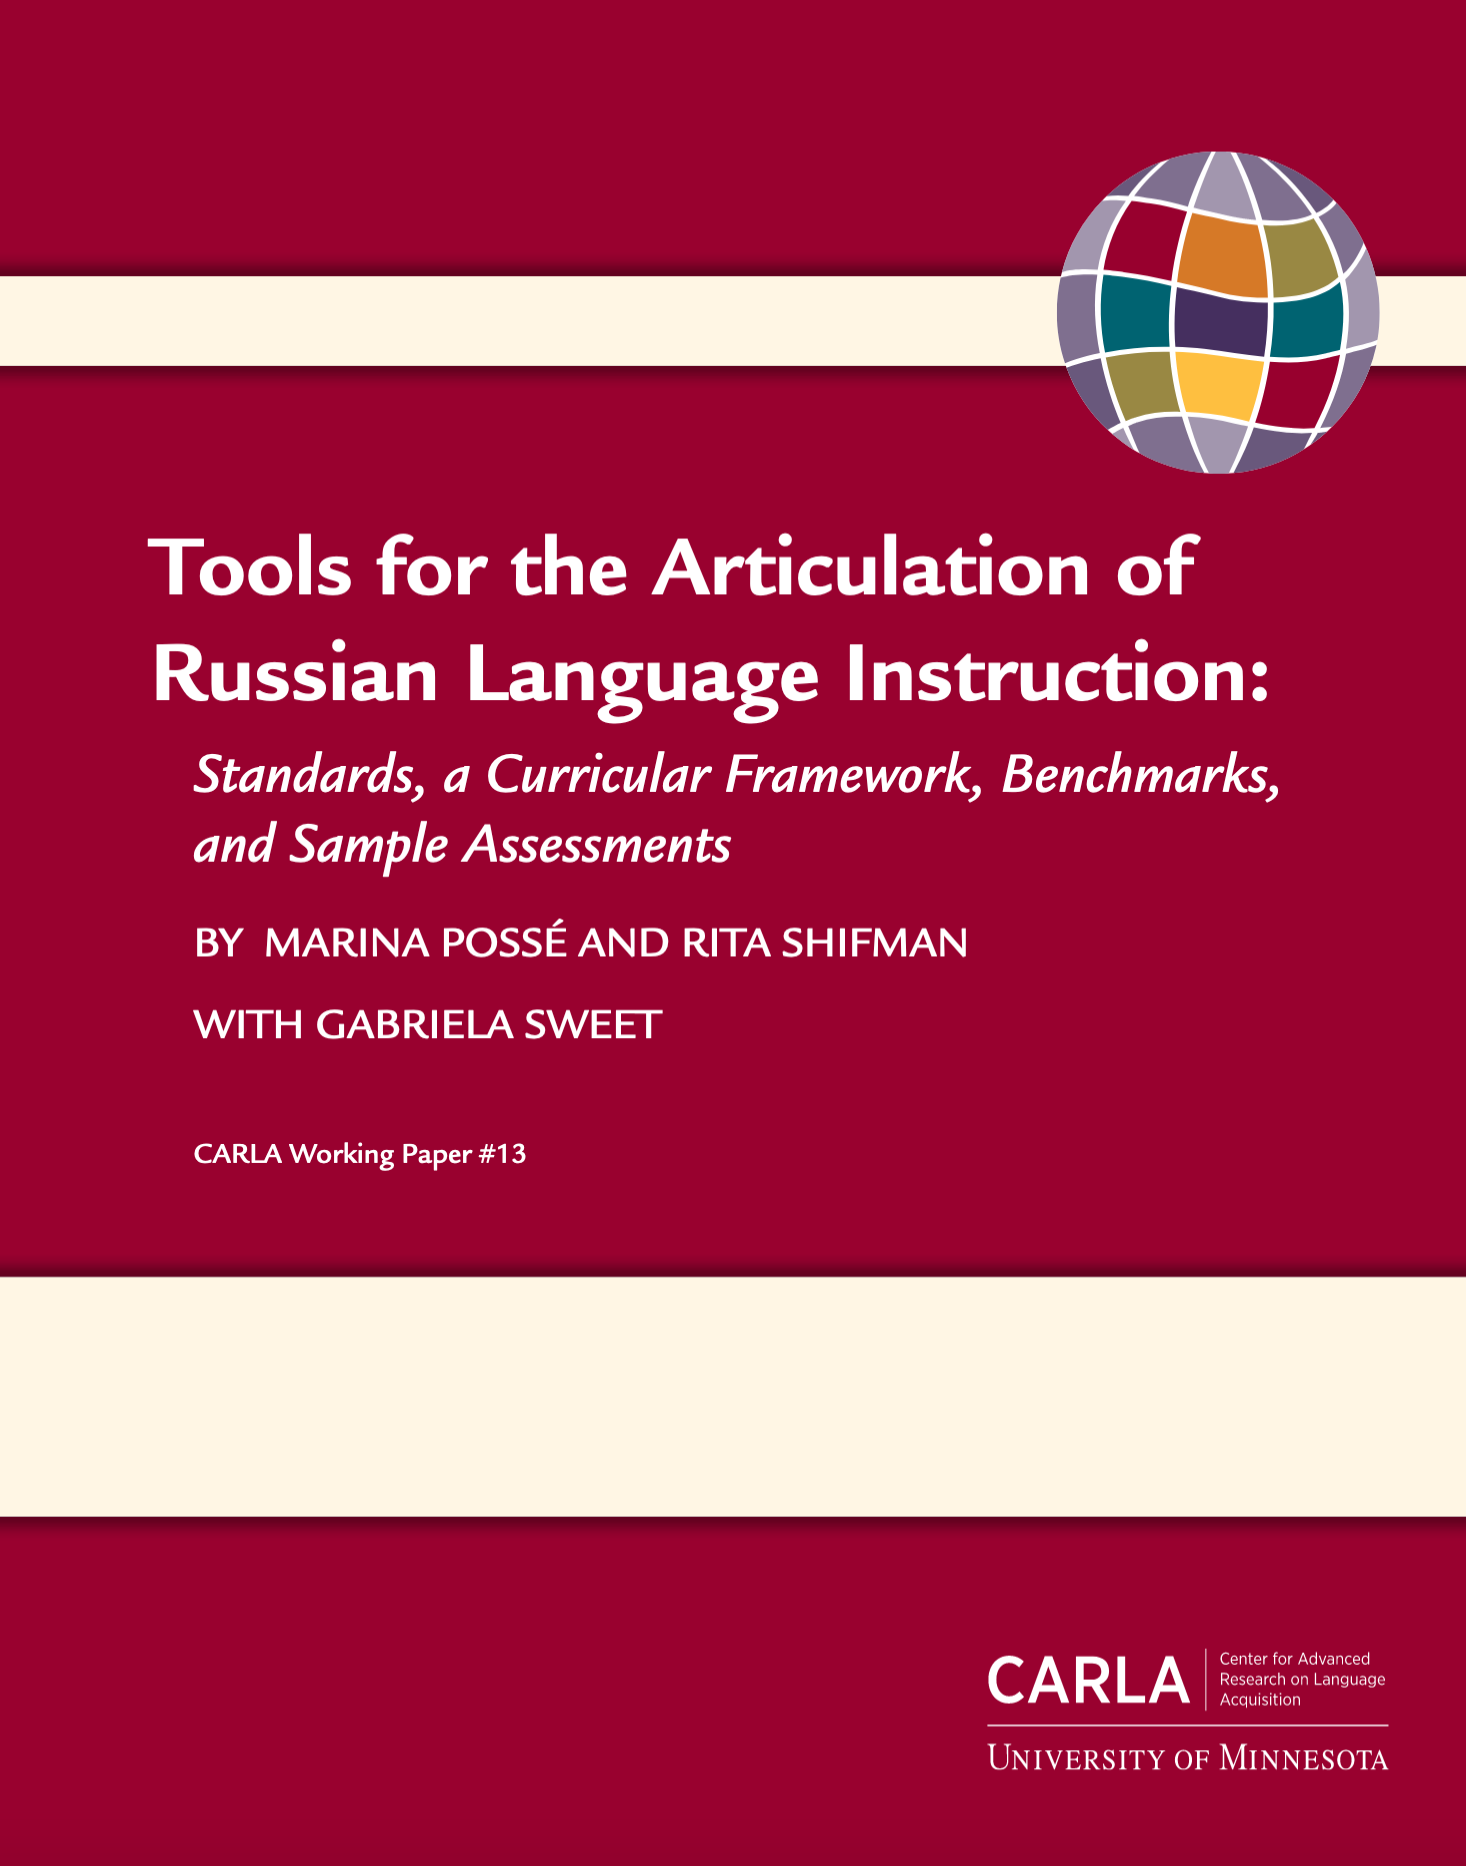 Tools for the Articulation of Russian Language Instruction